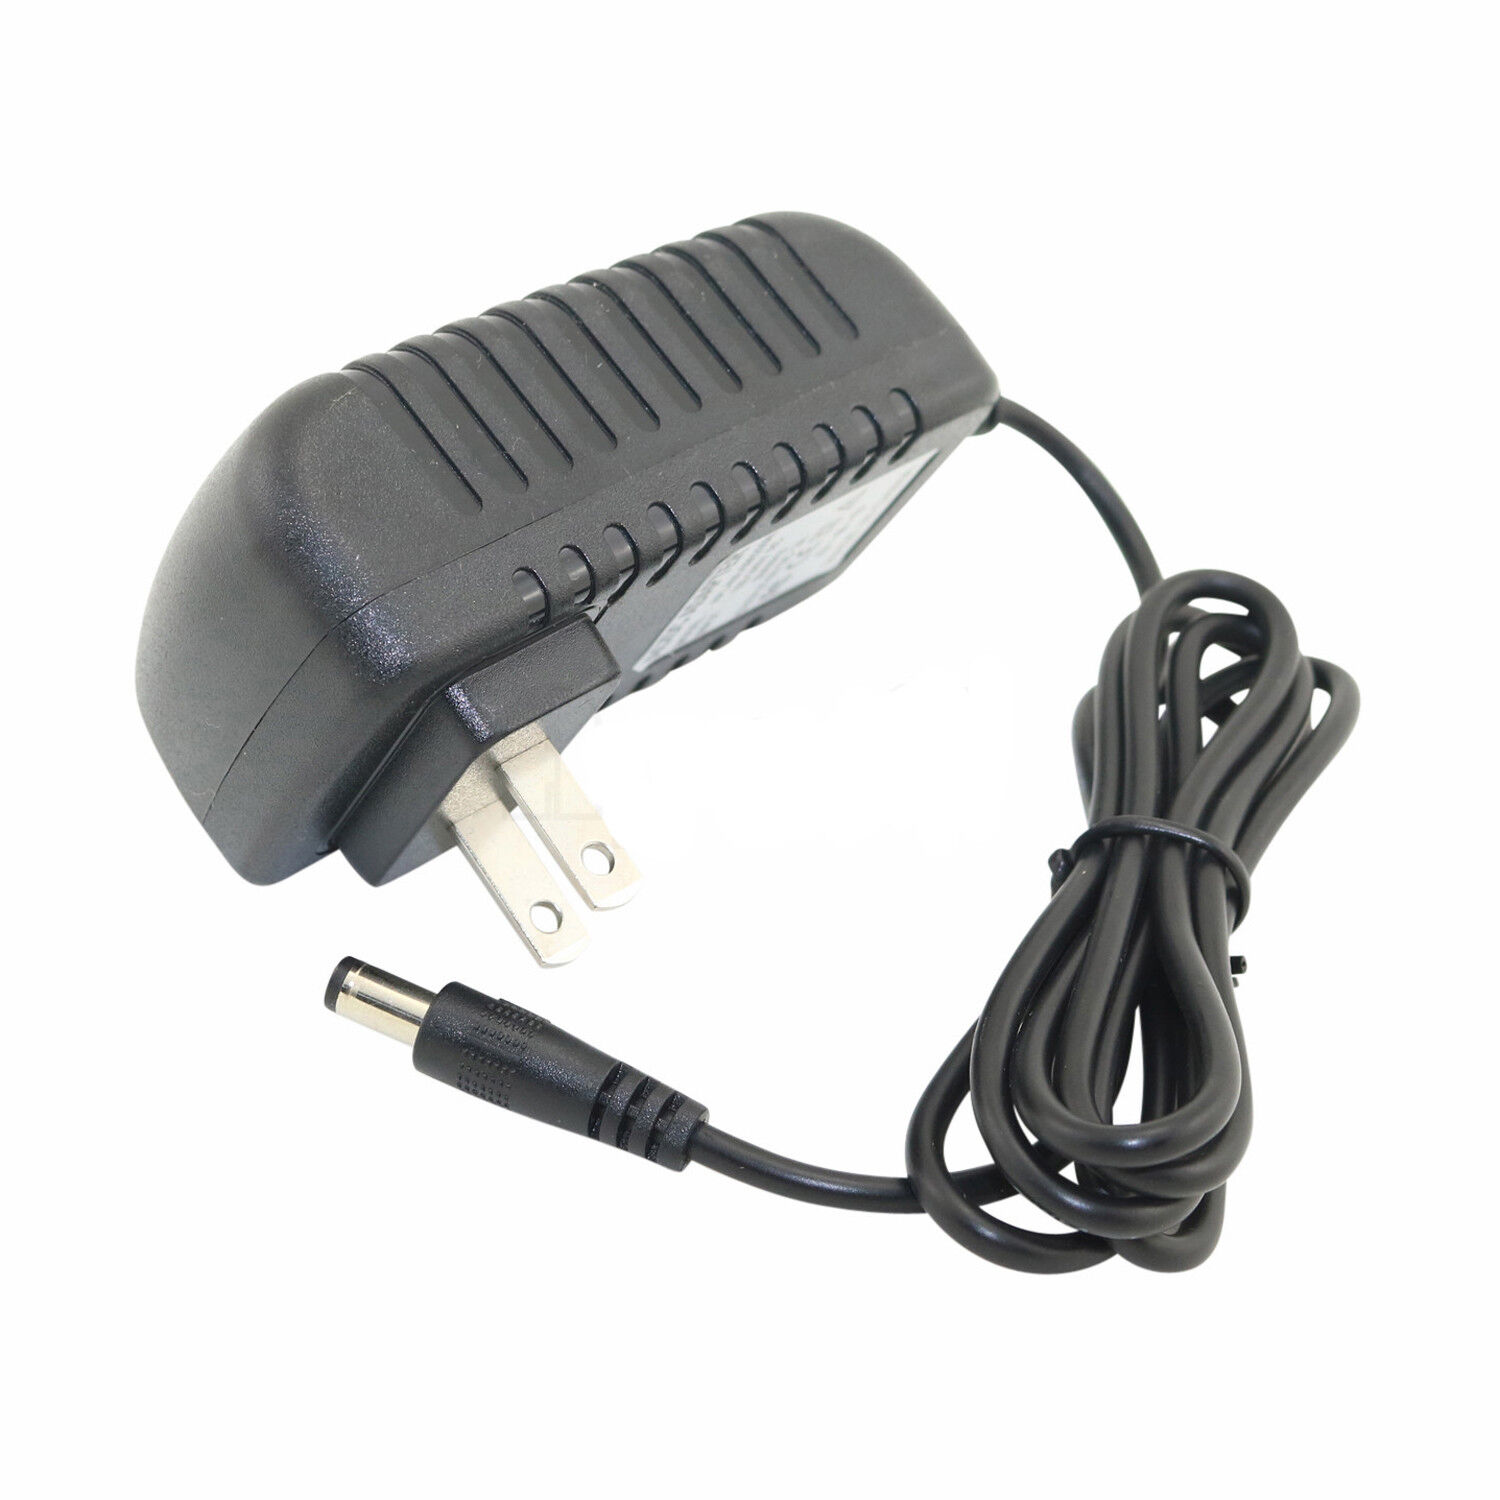 *Brand NEW*12V AC-AC AC Adapter For Maxim MA661246 MA661250 Class 2 Cord Cable PSU Power Supply